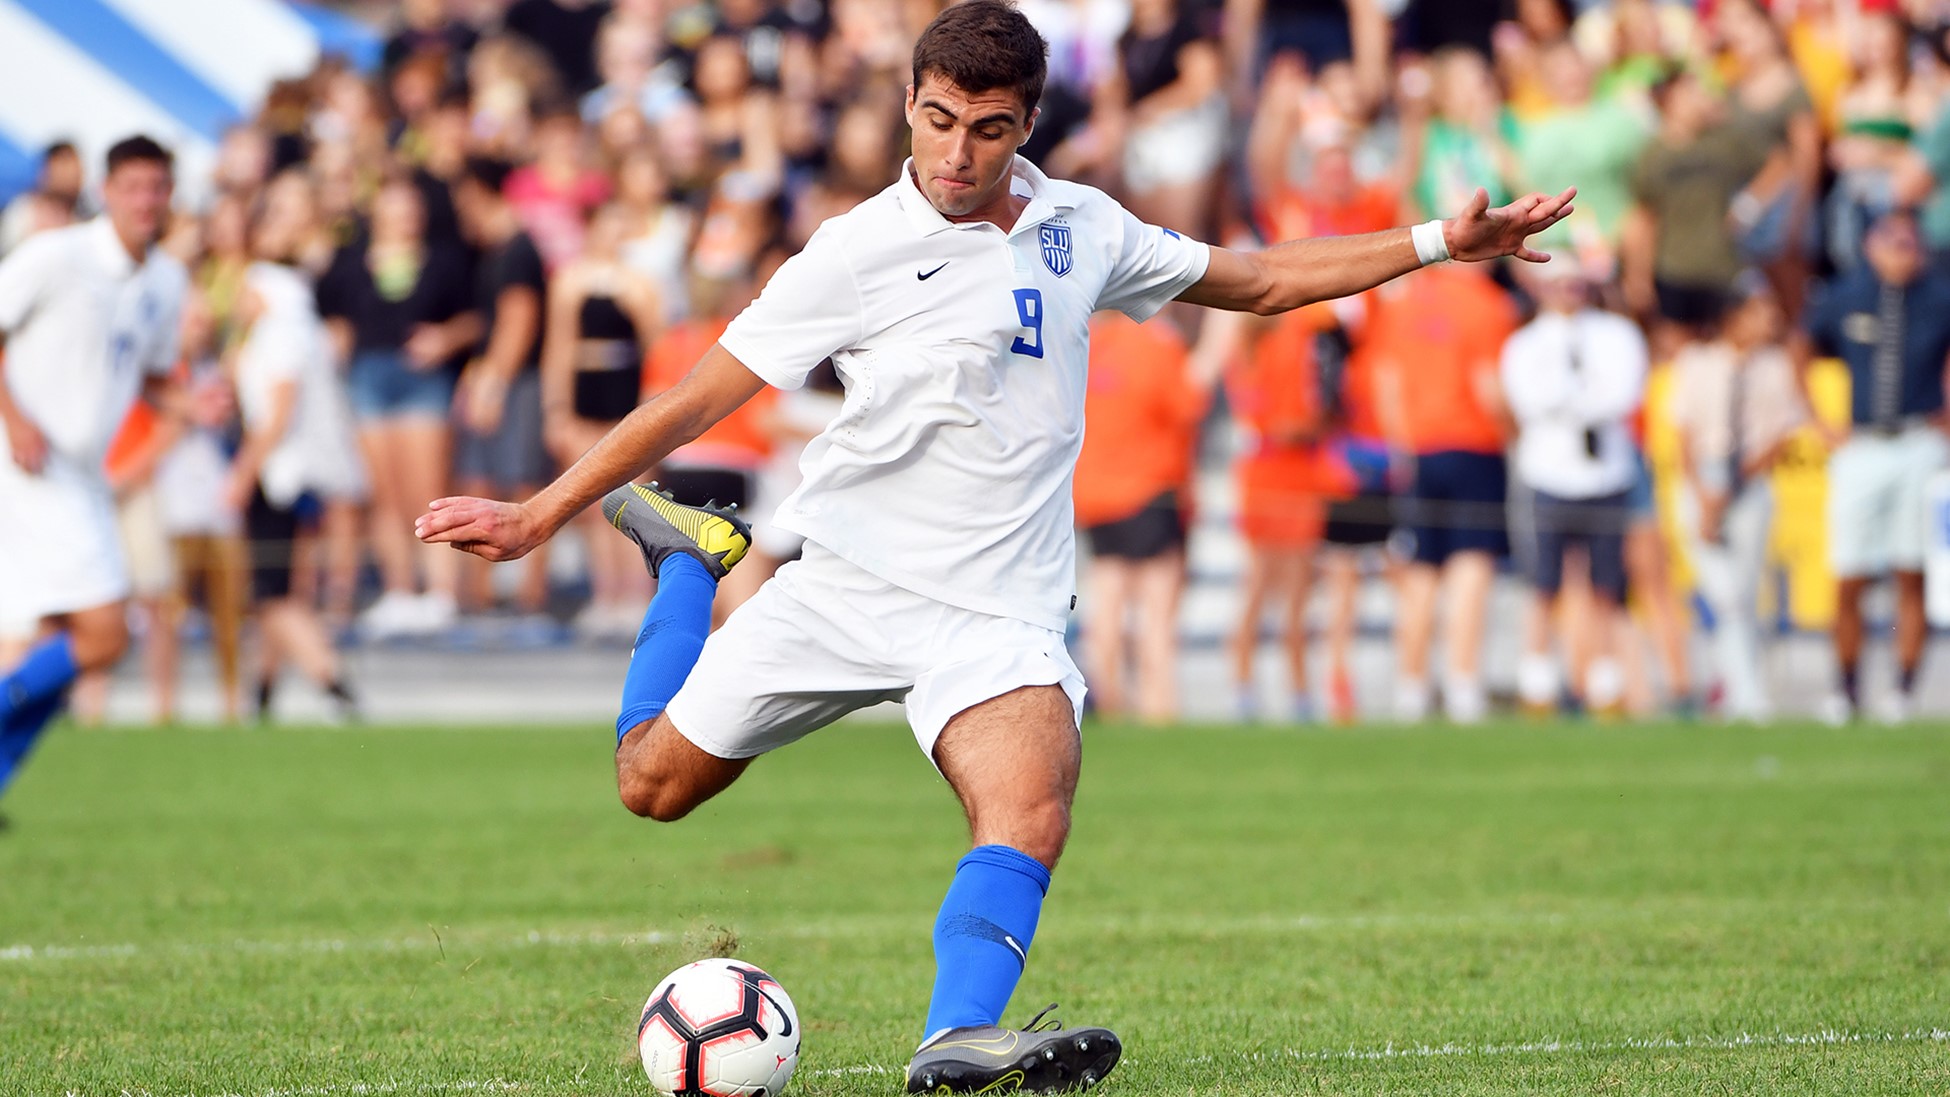 Georgetown's Stefan Stojanovic attempts to kick a ball during a game.